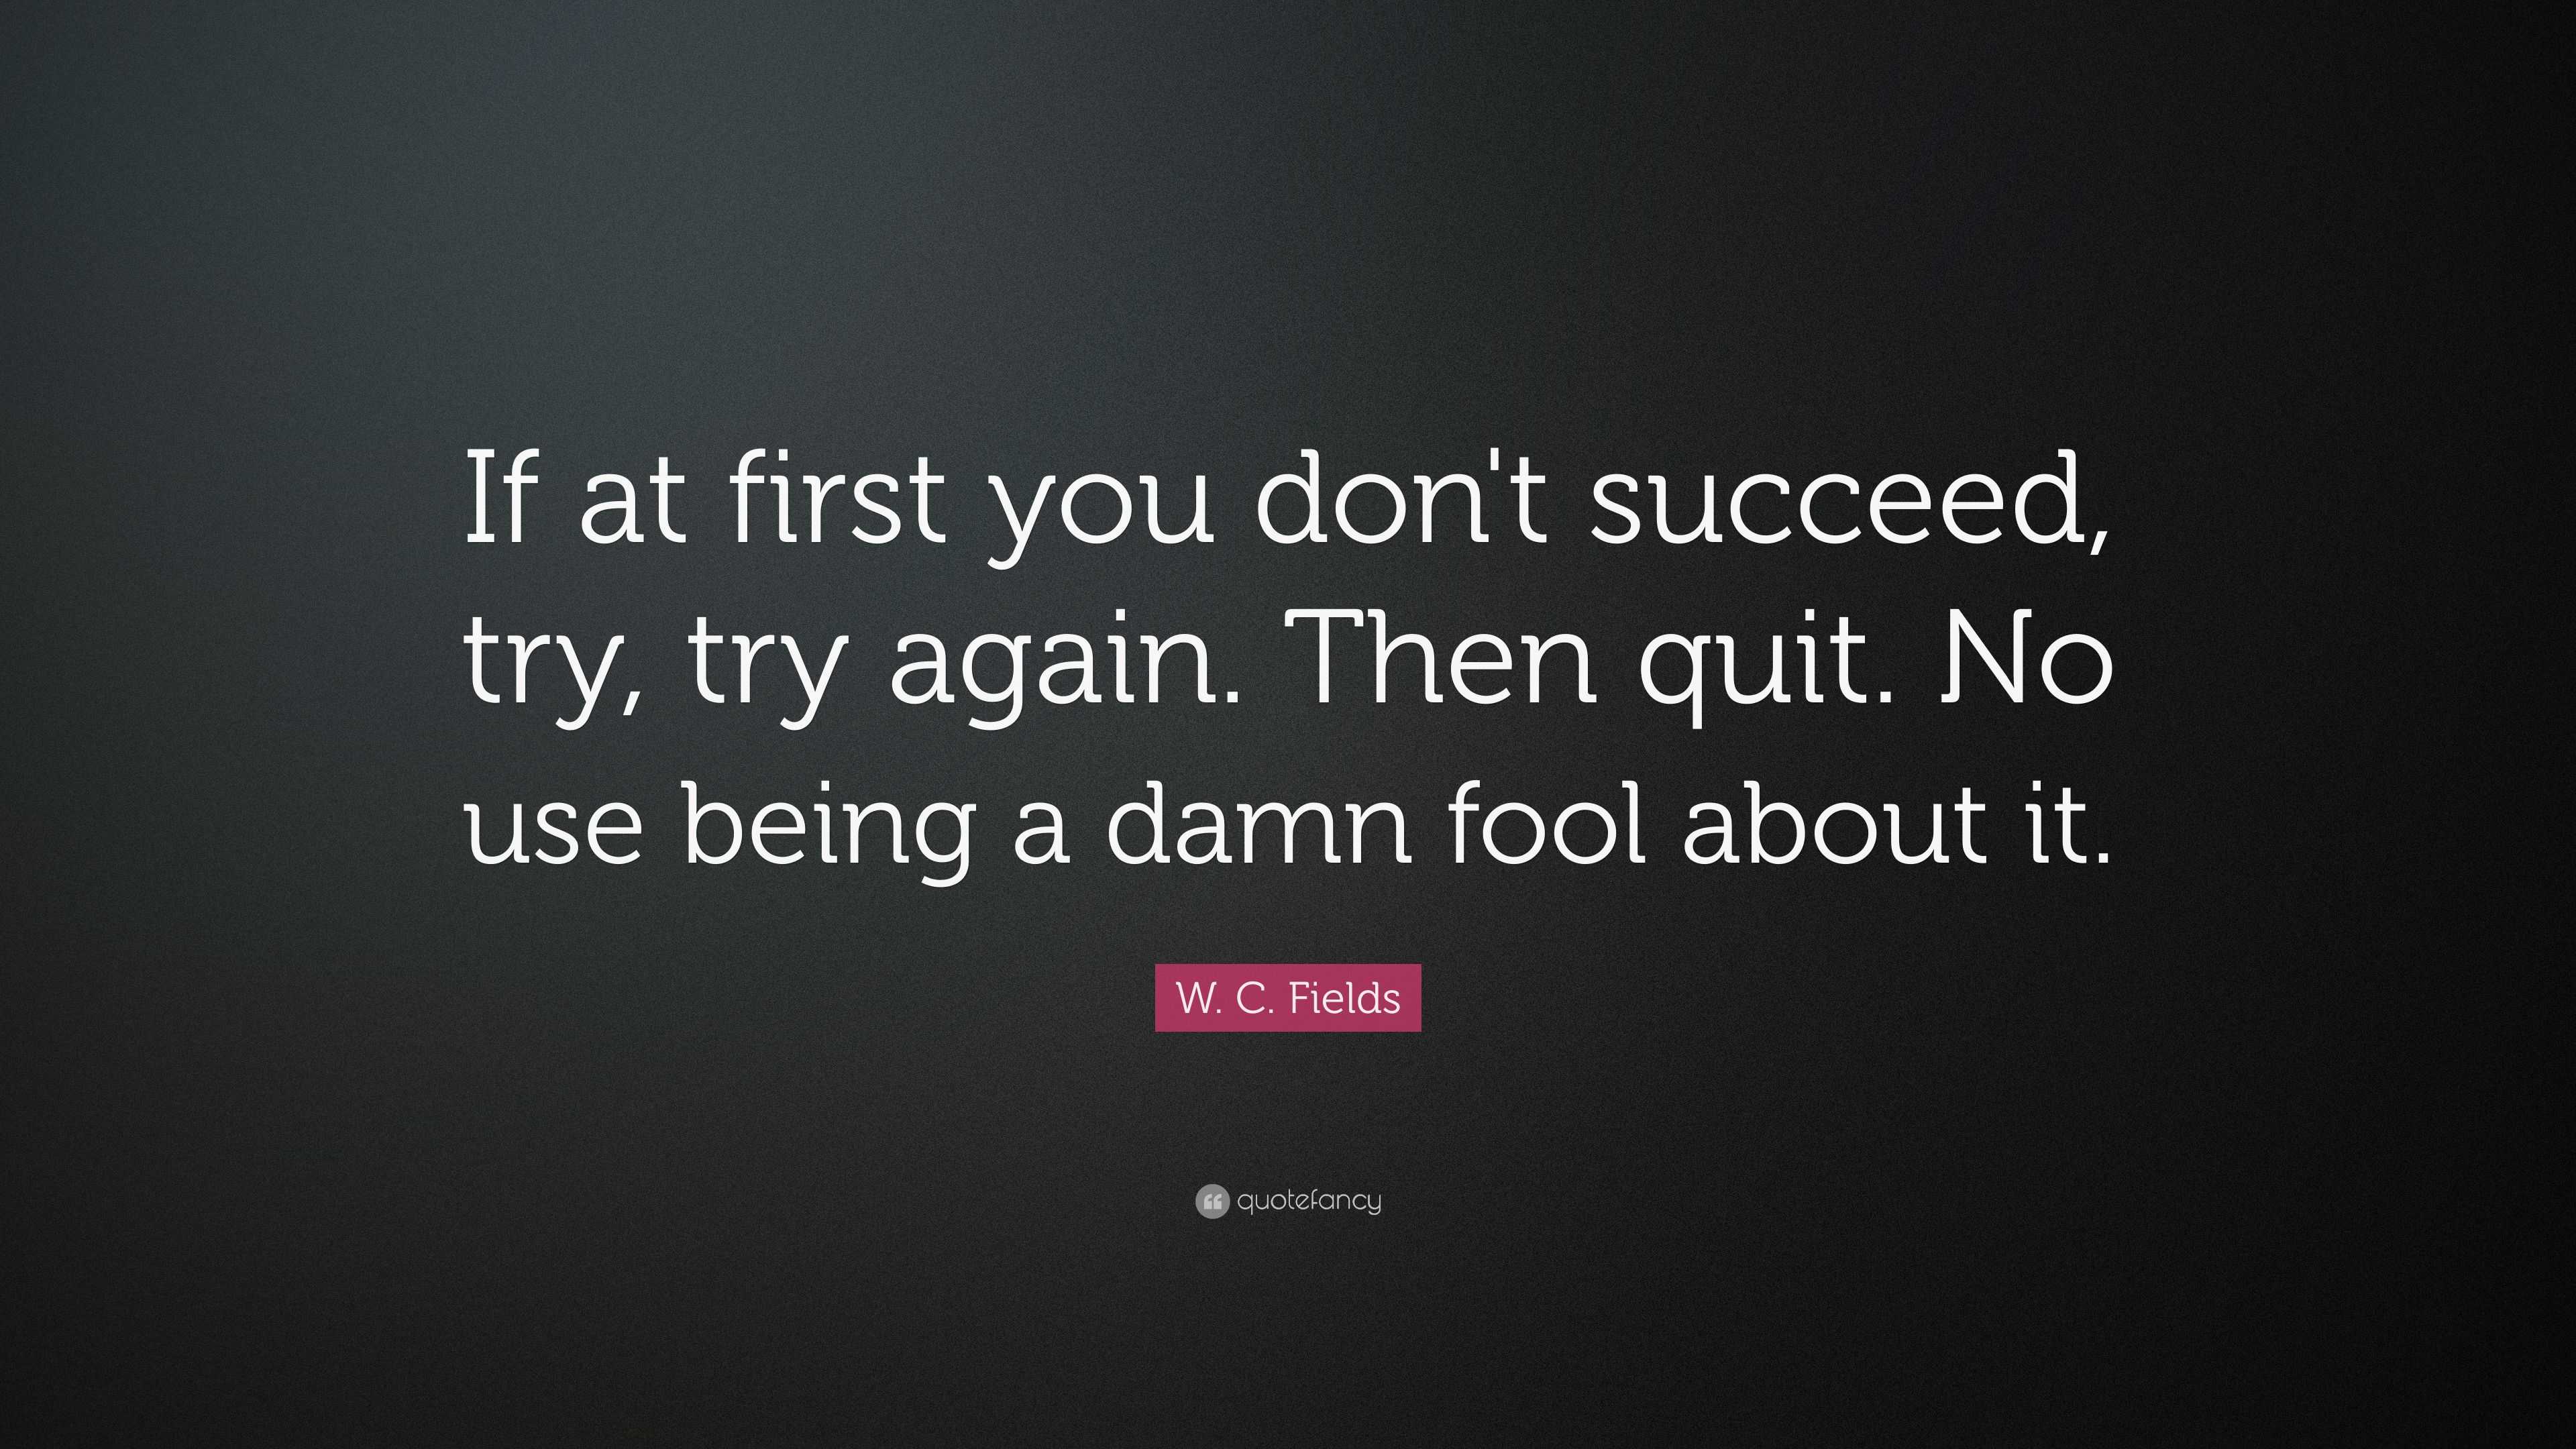 W. C. Fields Quote: “If at first you don't succeed, try, try again ...